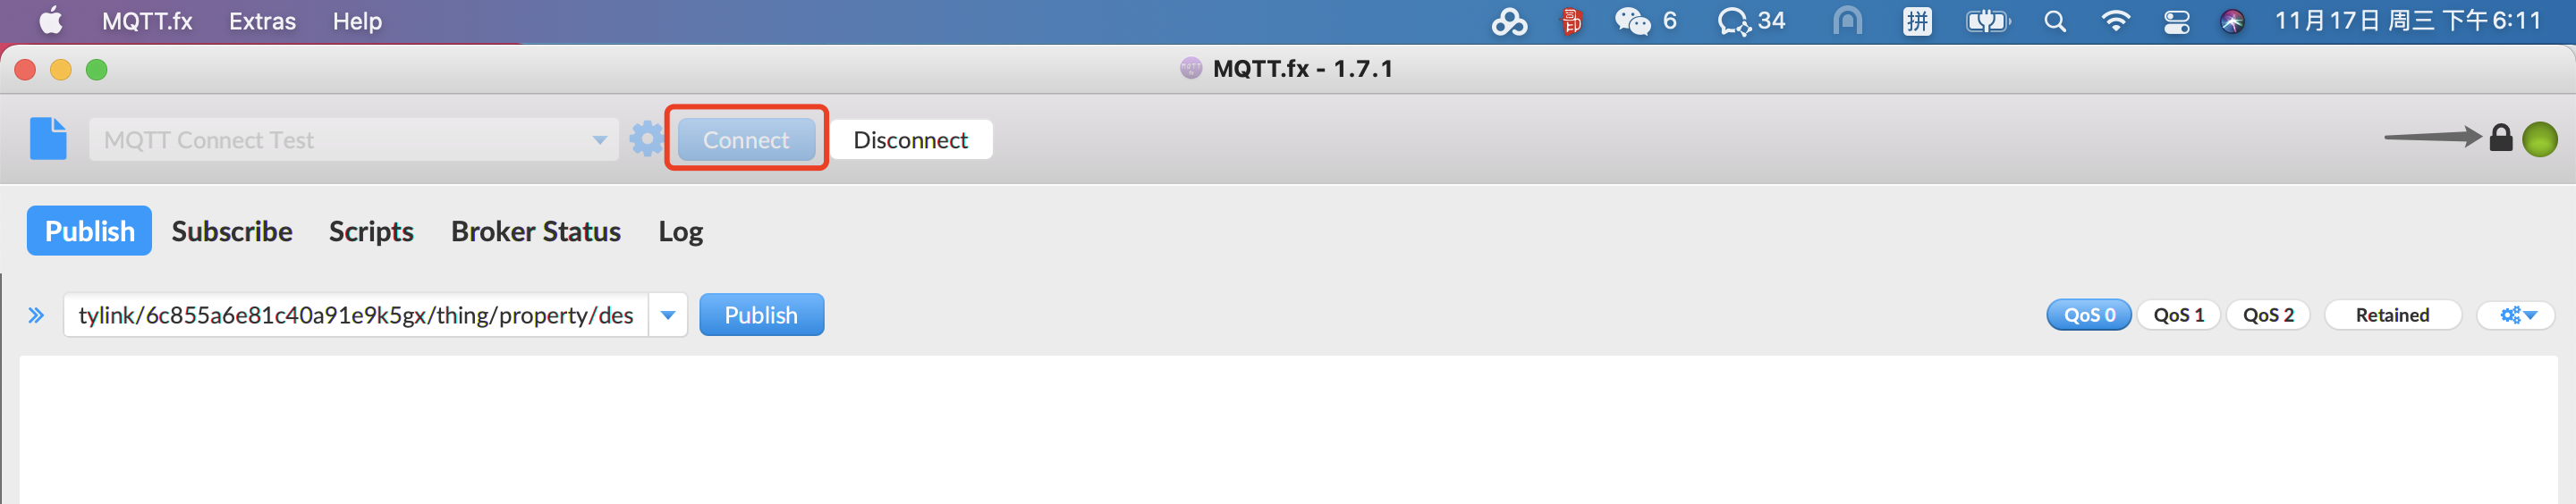 Device Connection Using MQTT.fx